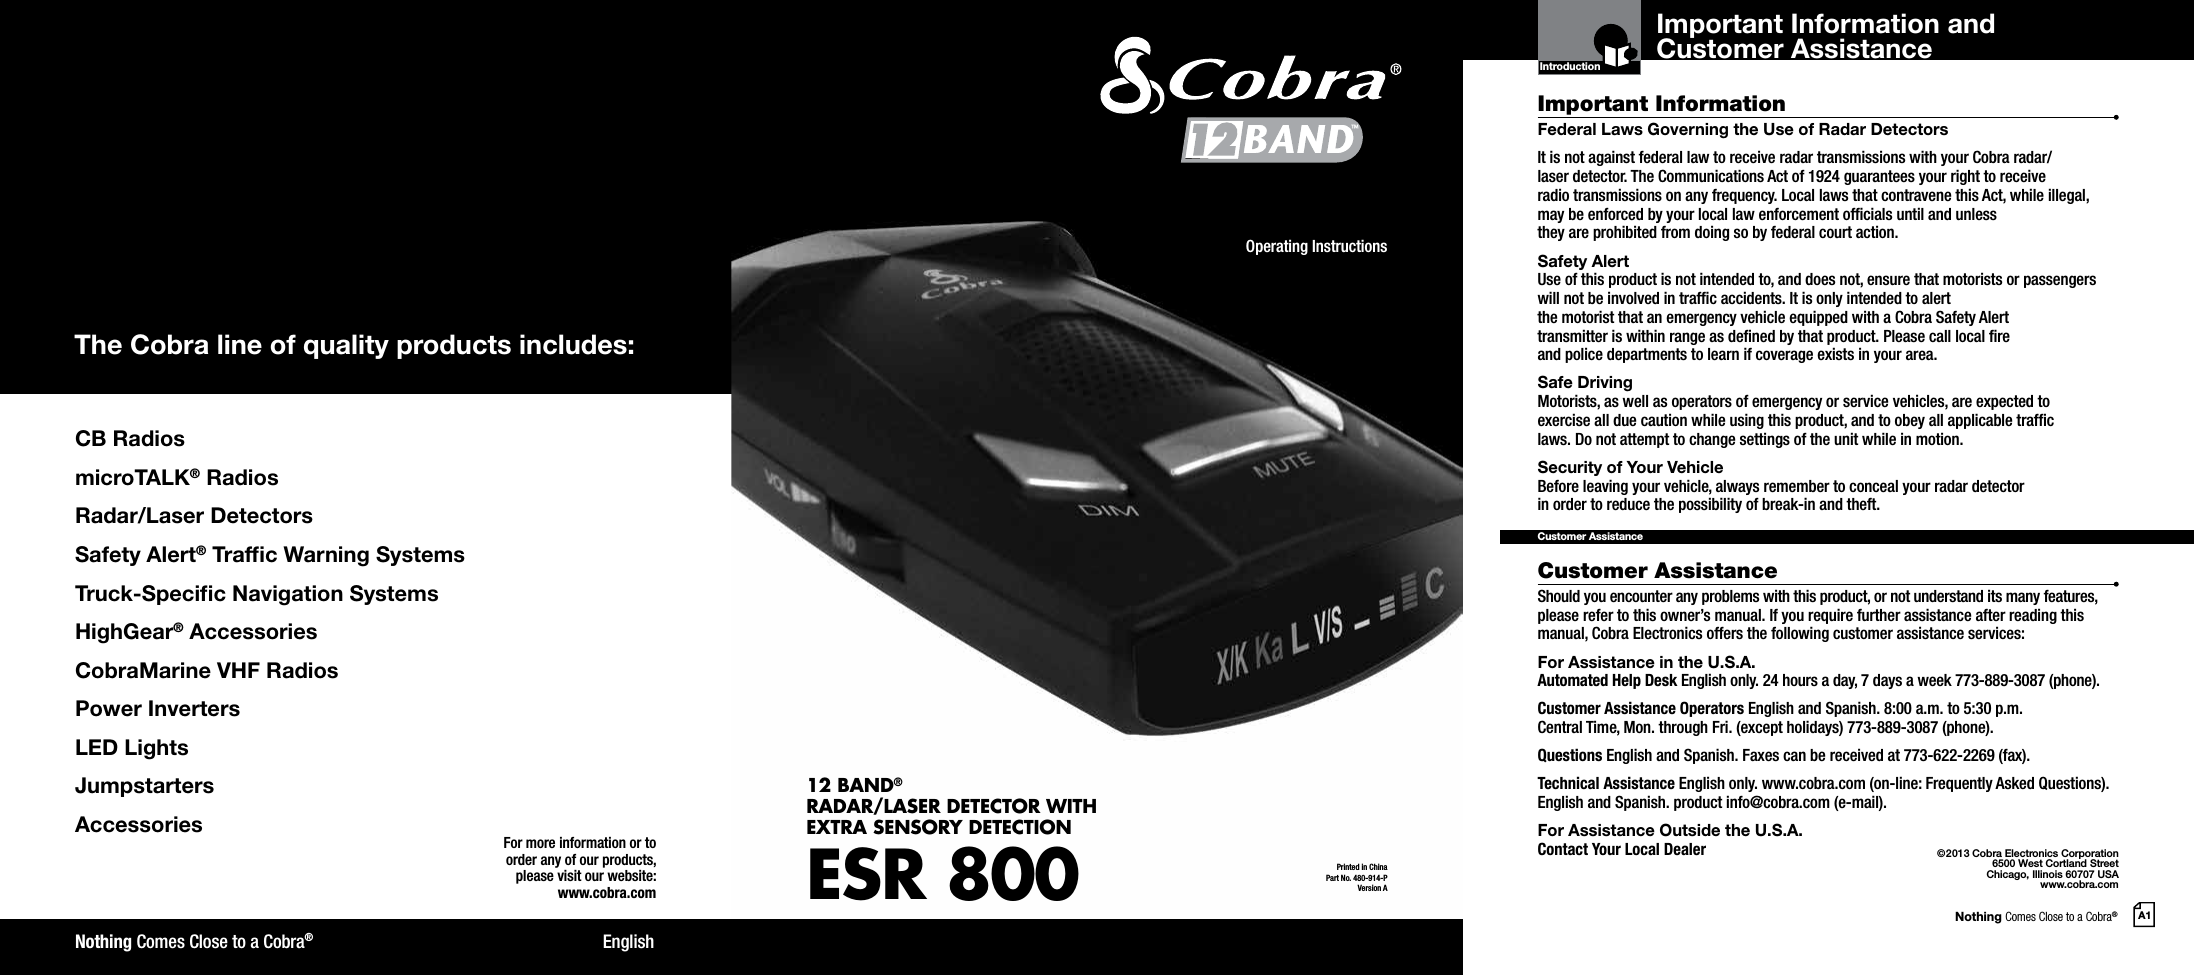 Nothing Comes Close to a Cobra®A1CB RadiosmicroTALK® RadiosRadar/Laser DetectorsSafety Alert® Trafc Warning SystemsTruck-Specic Navigation SystemsHighGear® AccessoriesCobraMarine VHF RadiosPower InvertersLED LightsJumpstarters AccessoriesThe Cobra line of quality products includes:For more information or to order any of our products, please visit our website:www.cobra.com©2013 Cobra Electronics Corporation6500 West Cortland StreetChicago, Illinois 60707 USAwww.cobra.comEnglishNothing Comes Close to a Cobra®Important InformationCustomer AssistanceFederal Laws Governing the Use of Radar Detectors It is not against federal law to receive radar transmissions with your Cobra radar/ laser detector. The Communications Act of 1924 guarantees your right to receive  radio transmissions on any frequency. Local laws that contravene this Act, while illegal, may be enforced by your local law enforcement ofcials until and unless  they are prohibited from doing so by federal court action.Safety AlertUse of this product is not intended to, and does not, ensure that motorists or passengers will not be involved in trafc accidents. It is only intended to alert  the motorist that an emergency vehicle equipped with a Cobra Safety Alert  transmitter is within range as dened by that product. Please call local re  and police departments to learn if coverage exists in your area.Safe Driving Motorists, as well as operators of emergency or service vehicles, are expected to exercise all due caution while using this product, and to obey all applicable trafc  laws. Do not attempt to change settings of the unit while in motion.Security of Your Vehicle Before leaving your vehicle, always remember to conceal your radar detector  in order to reduce the possibility of break-in and theft.Should you encounter any problems with this product, or not understand its many features, please refer to this owner’s manual. If you require further assistance after reading this manual, Cobra Electronics offers the following customer assistance services:For Assistance in the U.S.A. Automated Help Desk English only. 24 hours a day, 7 days a week 773-889-3087 (phone).Customer Assistance Operators English and Spanish. 8:00 a.m. to 5:30 p.m.  Central Time, Mon. through Fri. (except holidays) 773-889-3087 (phone).Questions English and Spanish. Faxes can be received at 773-622-2269 (fax).Technical Assistance English only. www.cobra.com (on-line: Frequently Asked Questions). English and Spanish. product info@cobra.com (e-mail).For Assistance Outside the U.S.A.  Contact Your Local DealerCustomer AssistanceIntroductionPrinted in China Part No. 480-914-PVersion AOperating Instructions12 BAND® RADAR/LASER DETECTOR WITH EXTRA SENSORY DETECTIONESR 800™ Important Information and Customer Assistance